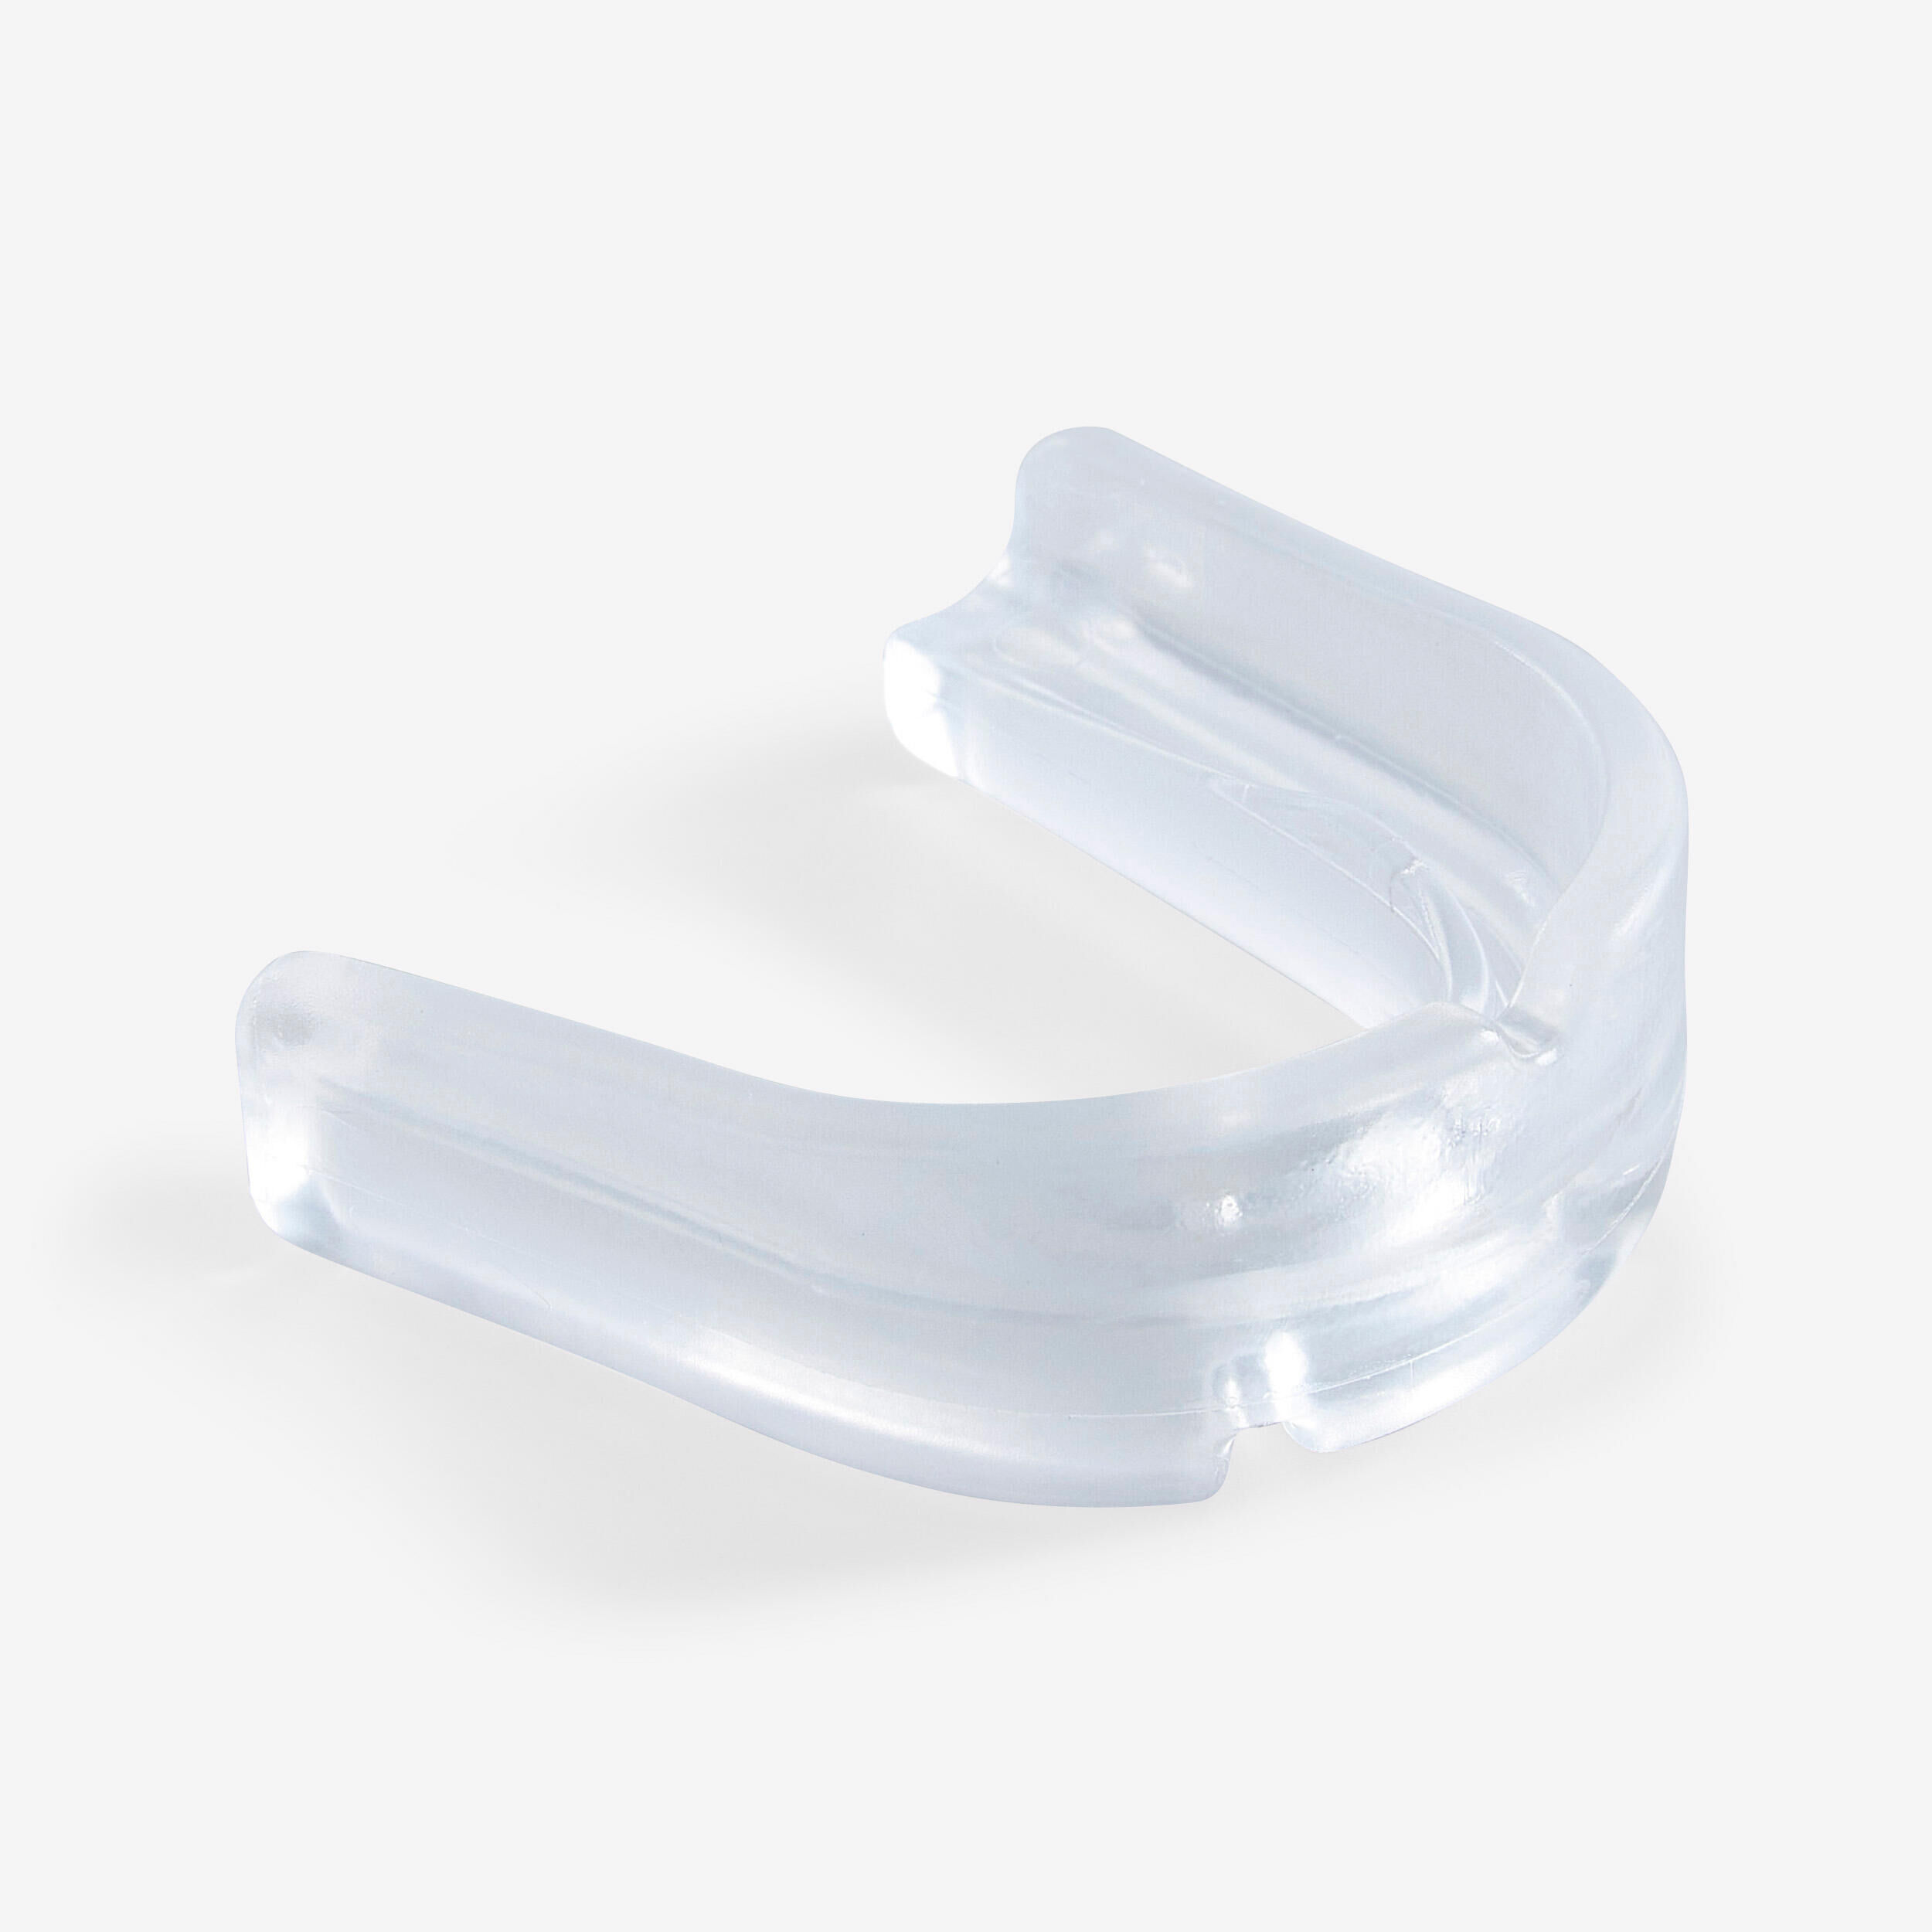 OUTSHOCK 100 Boxing and Martial Arts Mouthguard Size S - Clear